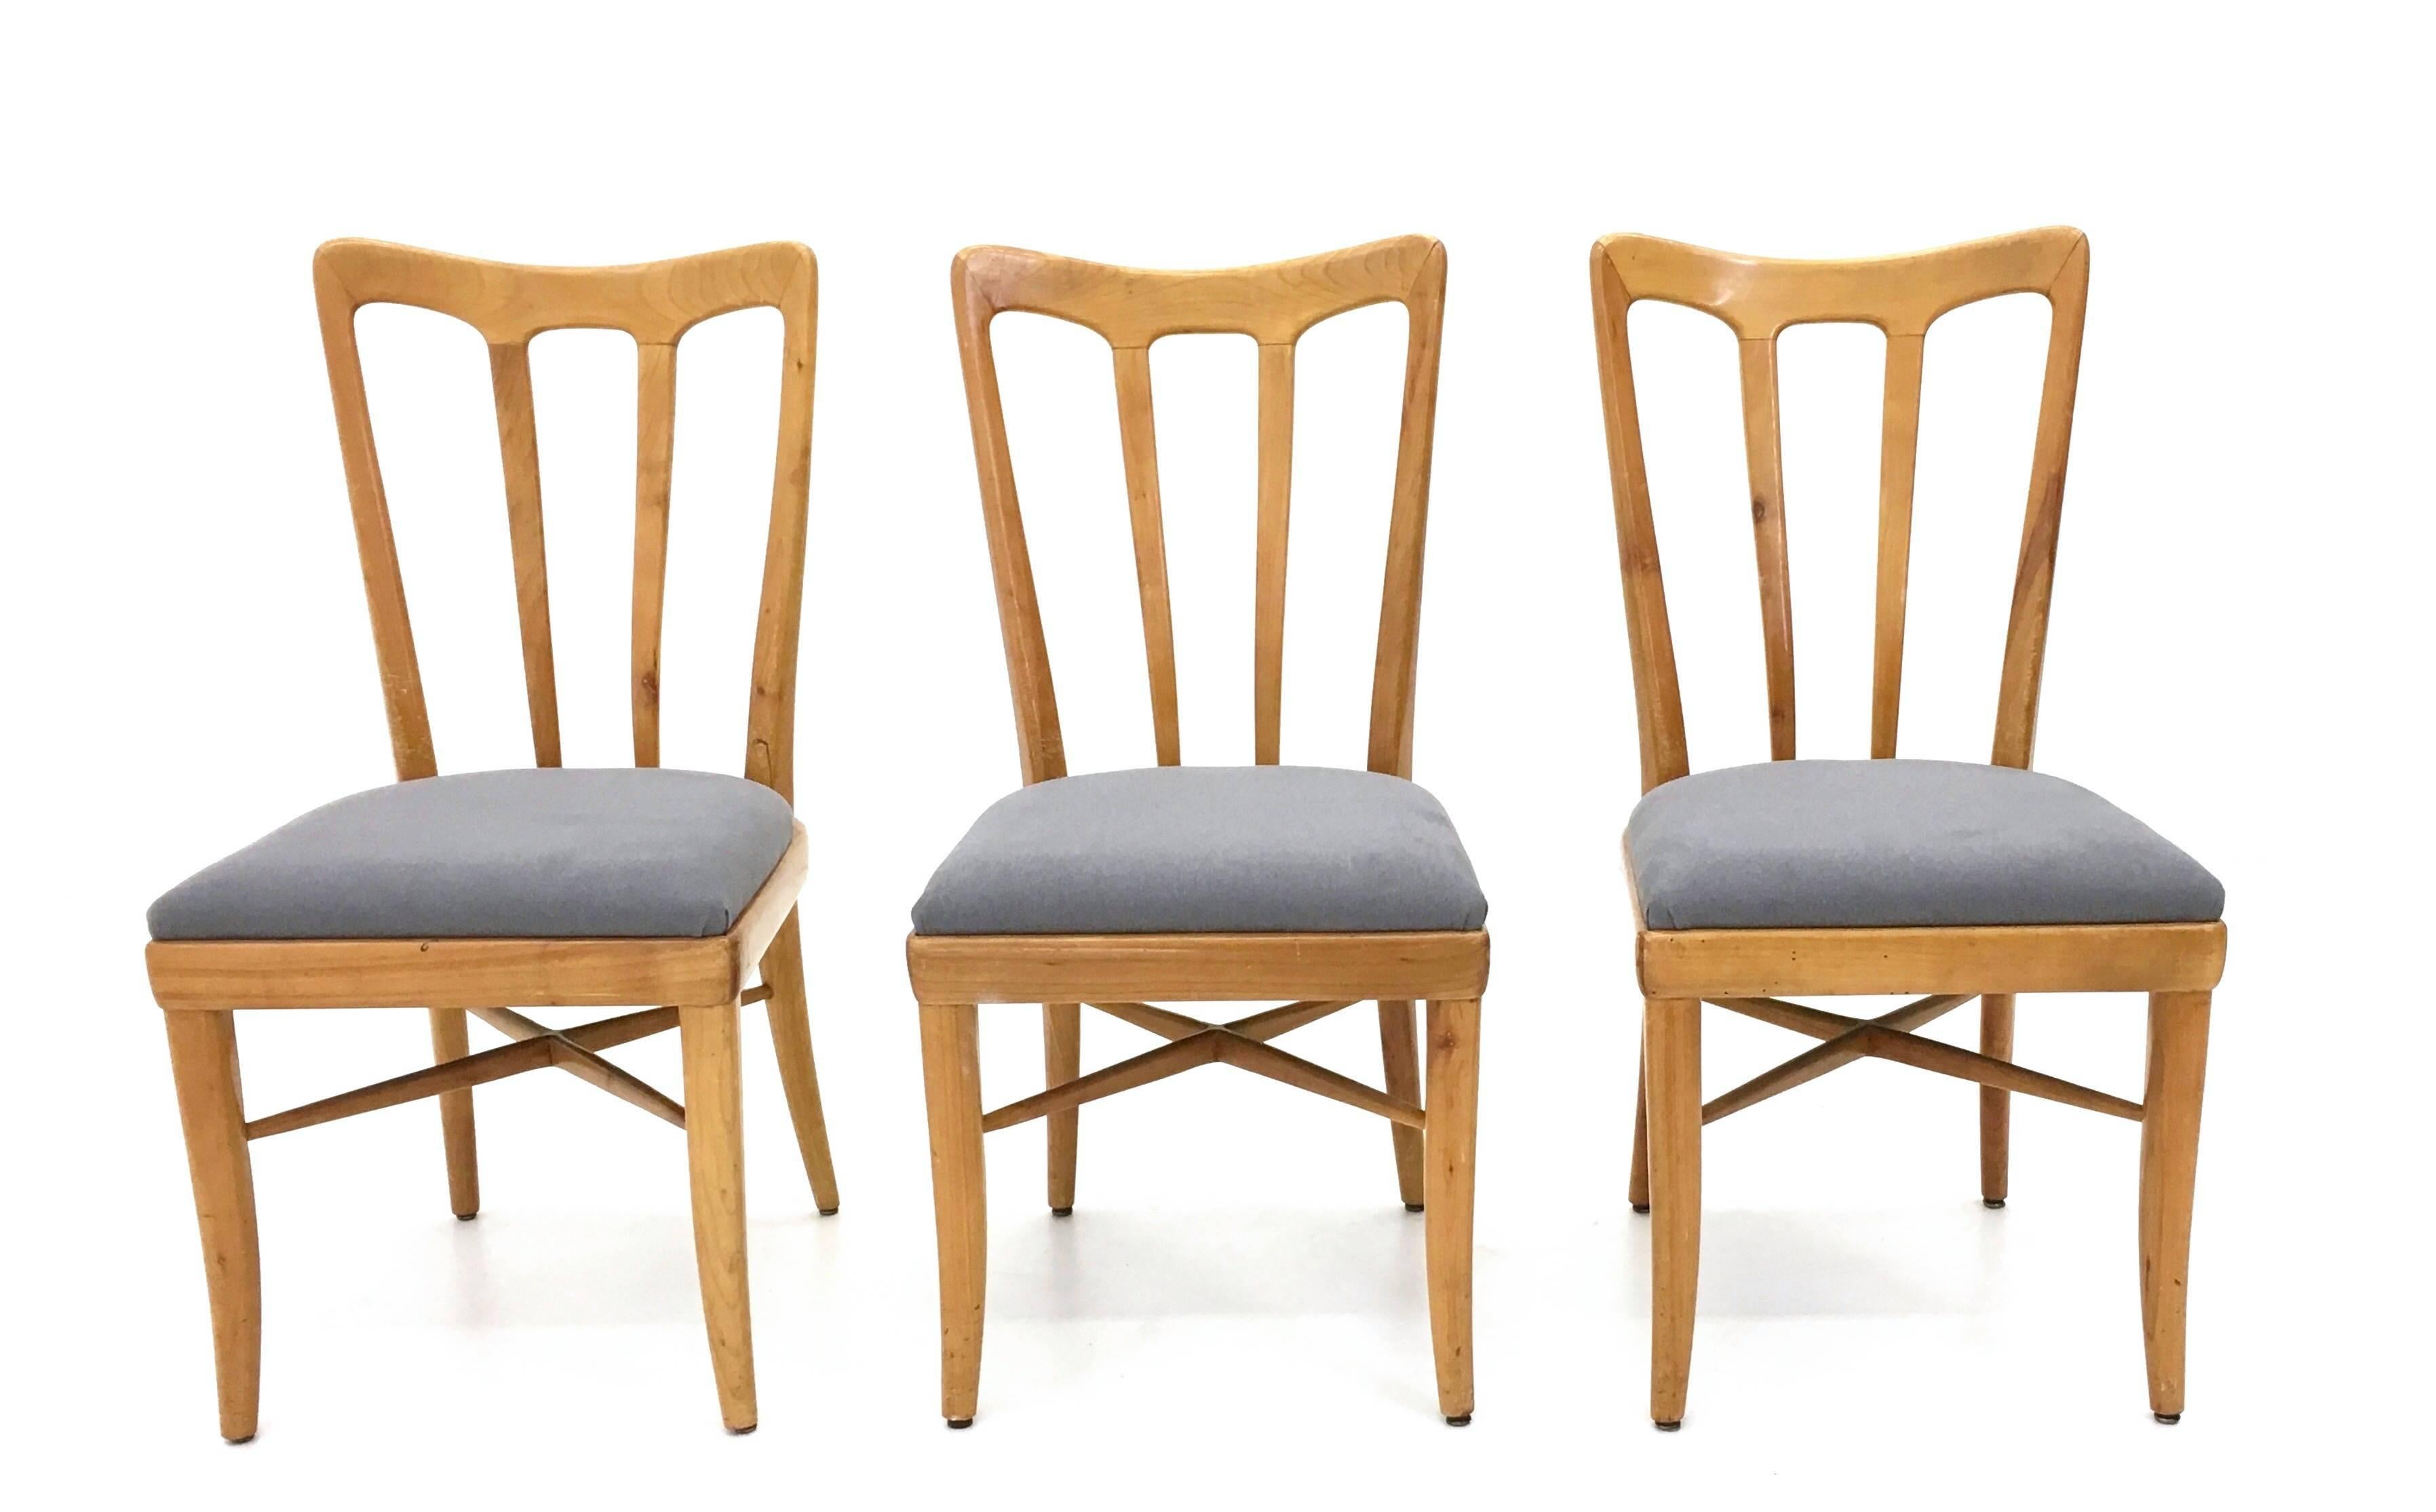 They are made in cherry and upholstered in grey fabric. 
These chairs are designed in the style of Guglielmo Ulrich.
They may show slight traces of use since they're vintage, but they can be considered as in excellent original condition and ready